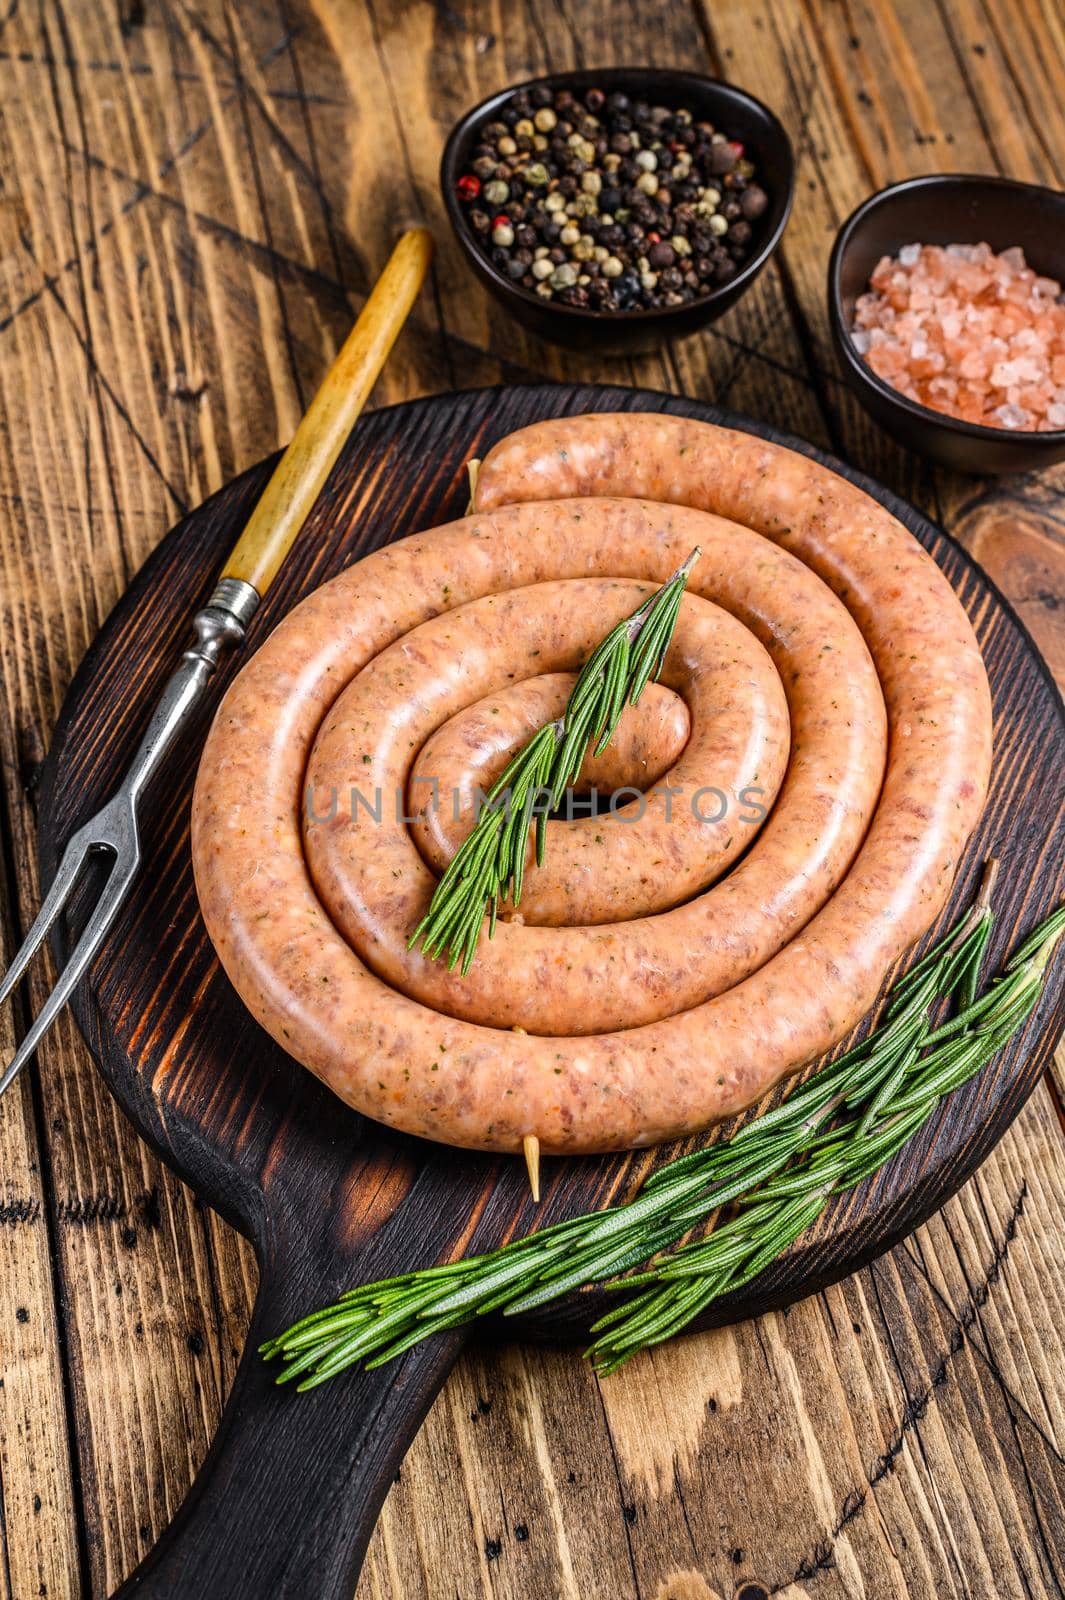 Raw spiral barbecue sausage from pork and beef ground meat. Wooden background. Top view.